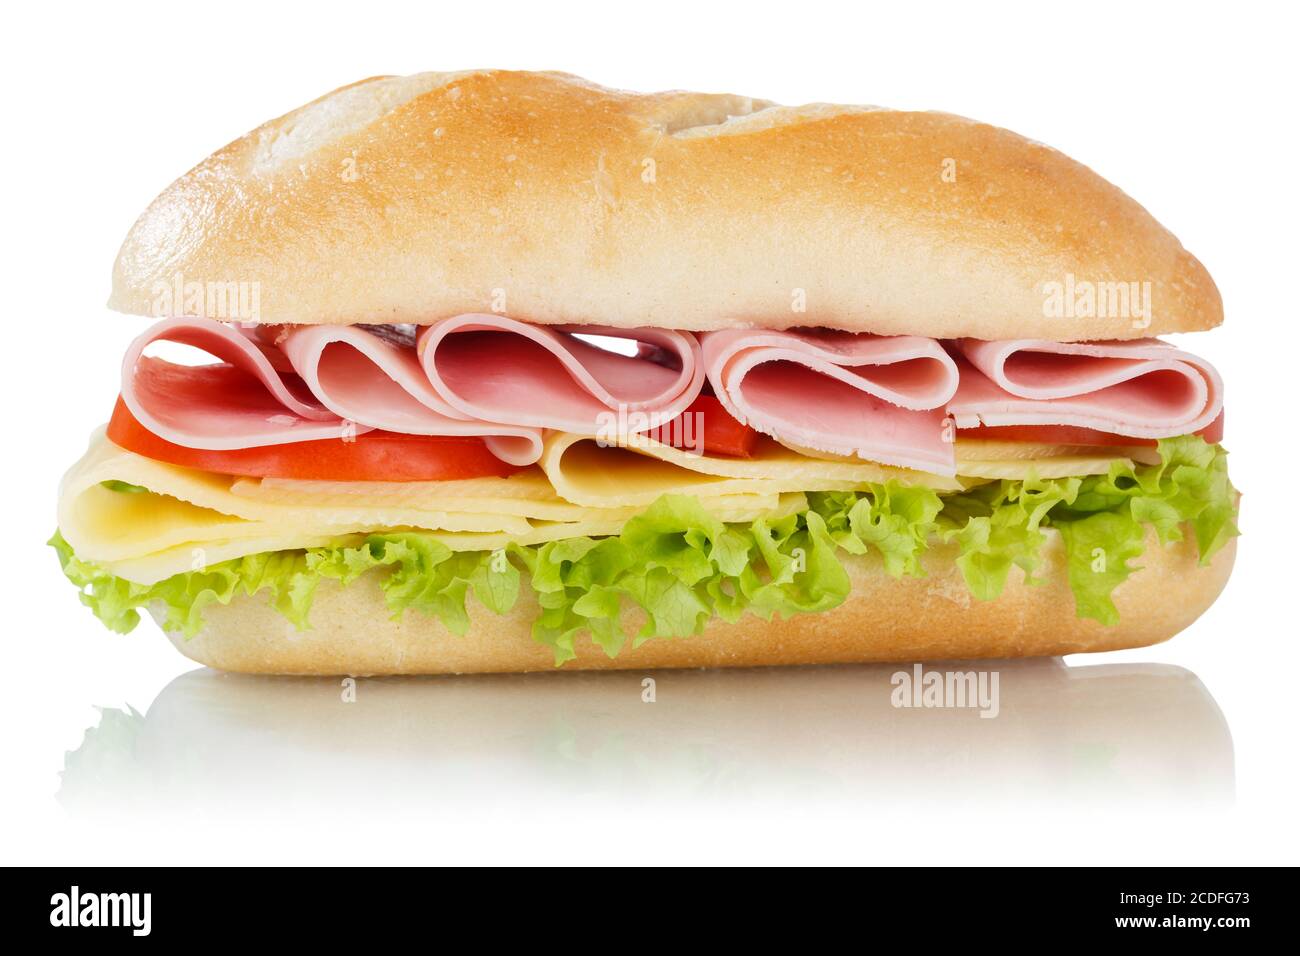 Sub sandwich with ham and cheese from the side isolated on a white background Stock Photo